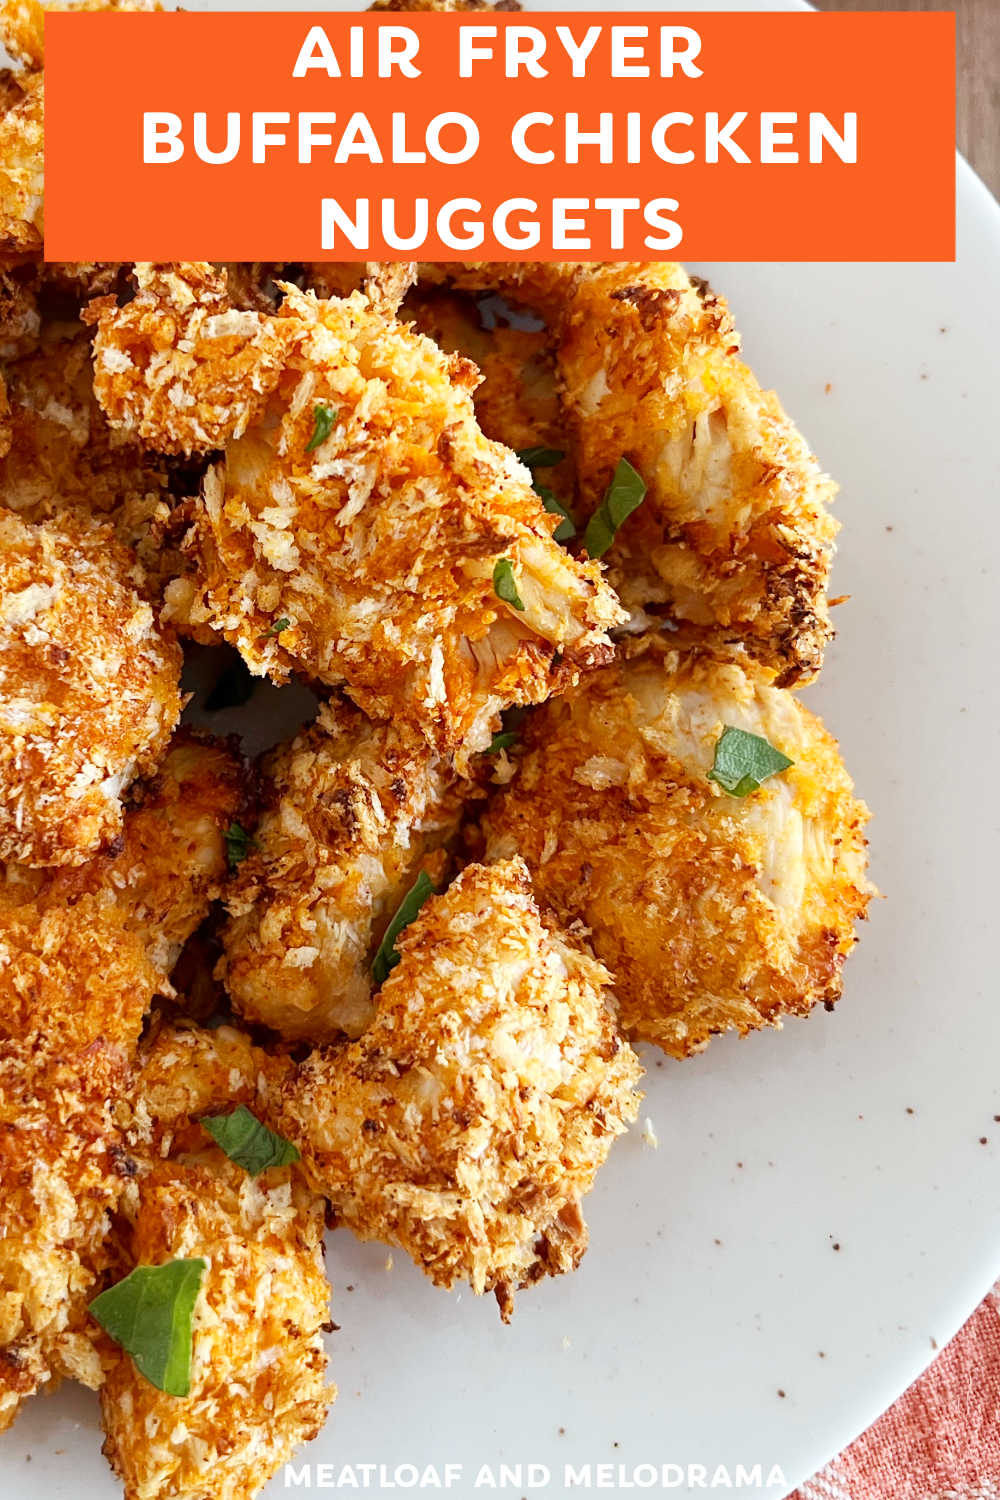 Air Fryer Buffalo Chicken Nuggets are boneless chicken breast bites dunked in hot sauce and panko bread crumbs and air fried until crispy.  An easy appetizer or quick dinner! Air fryer Buffalo chicken bites are the perfect snack for football season!  via @meamel